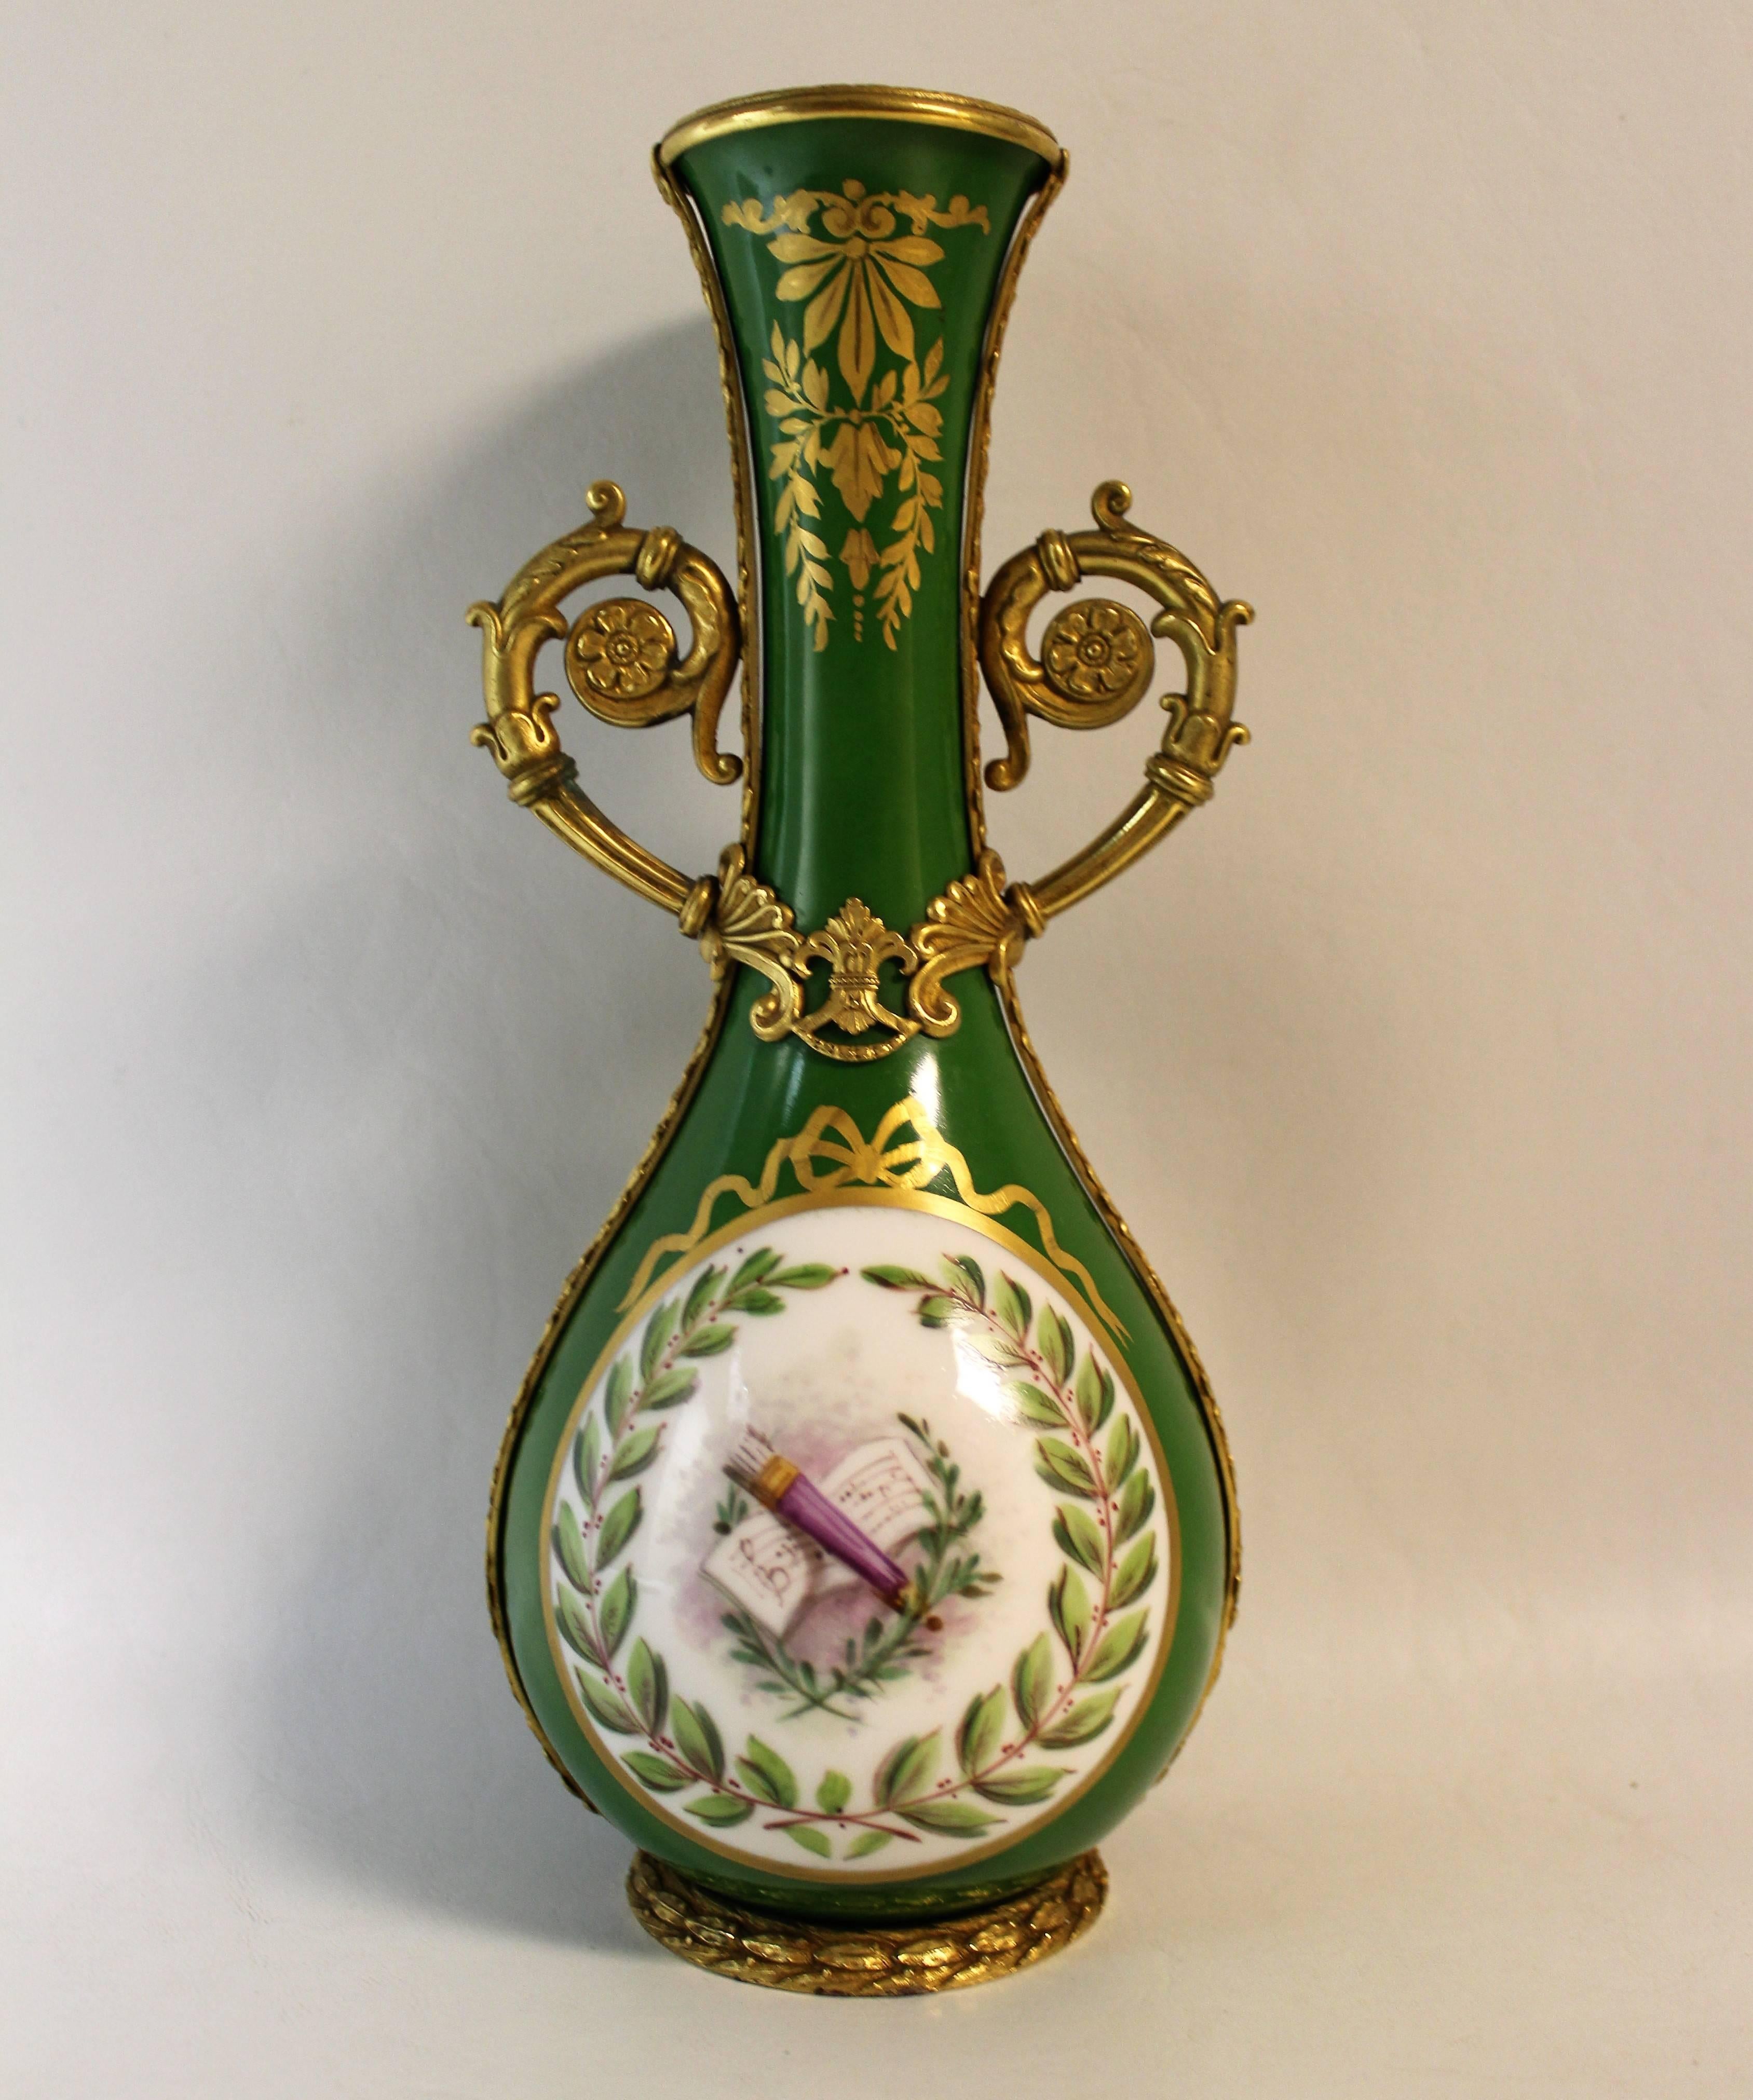 Beautiful 19th century French Sevres attributed ormolu bronze-mounted porcelain vase. The porcelain vase features an all-over mossy green glaze with a round cartouche at the front and back with a laurel wreath and a musical device at the center